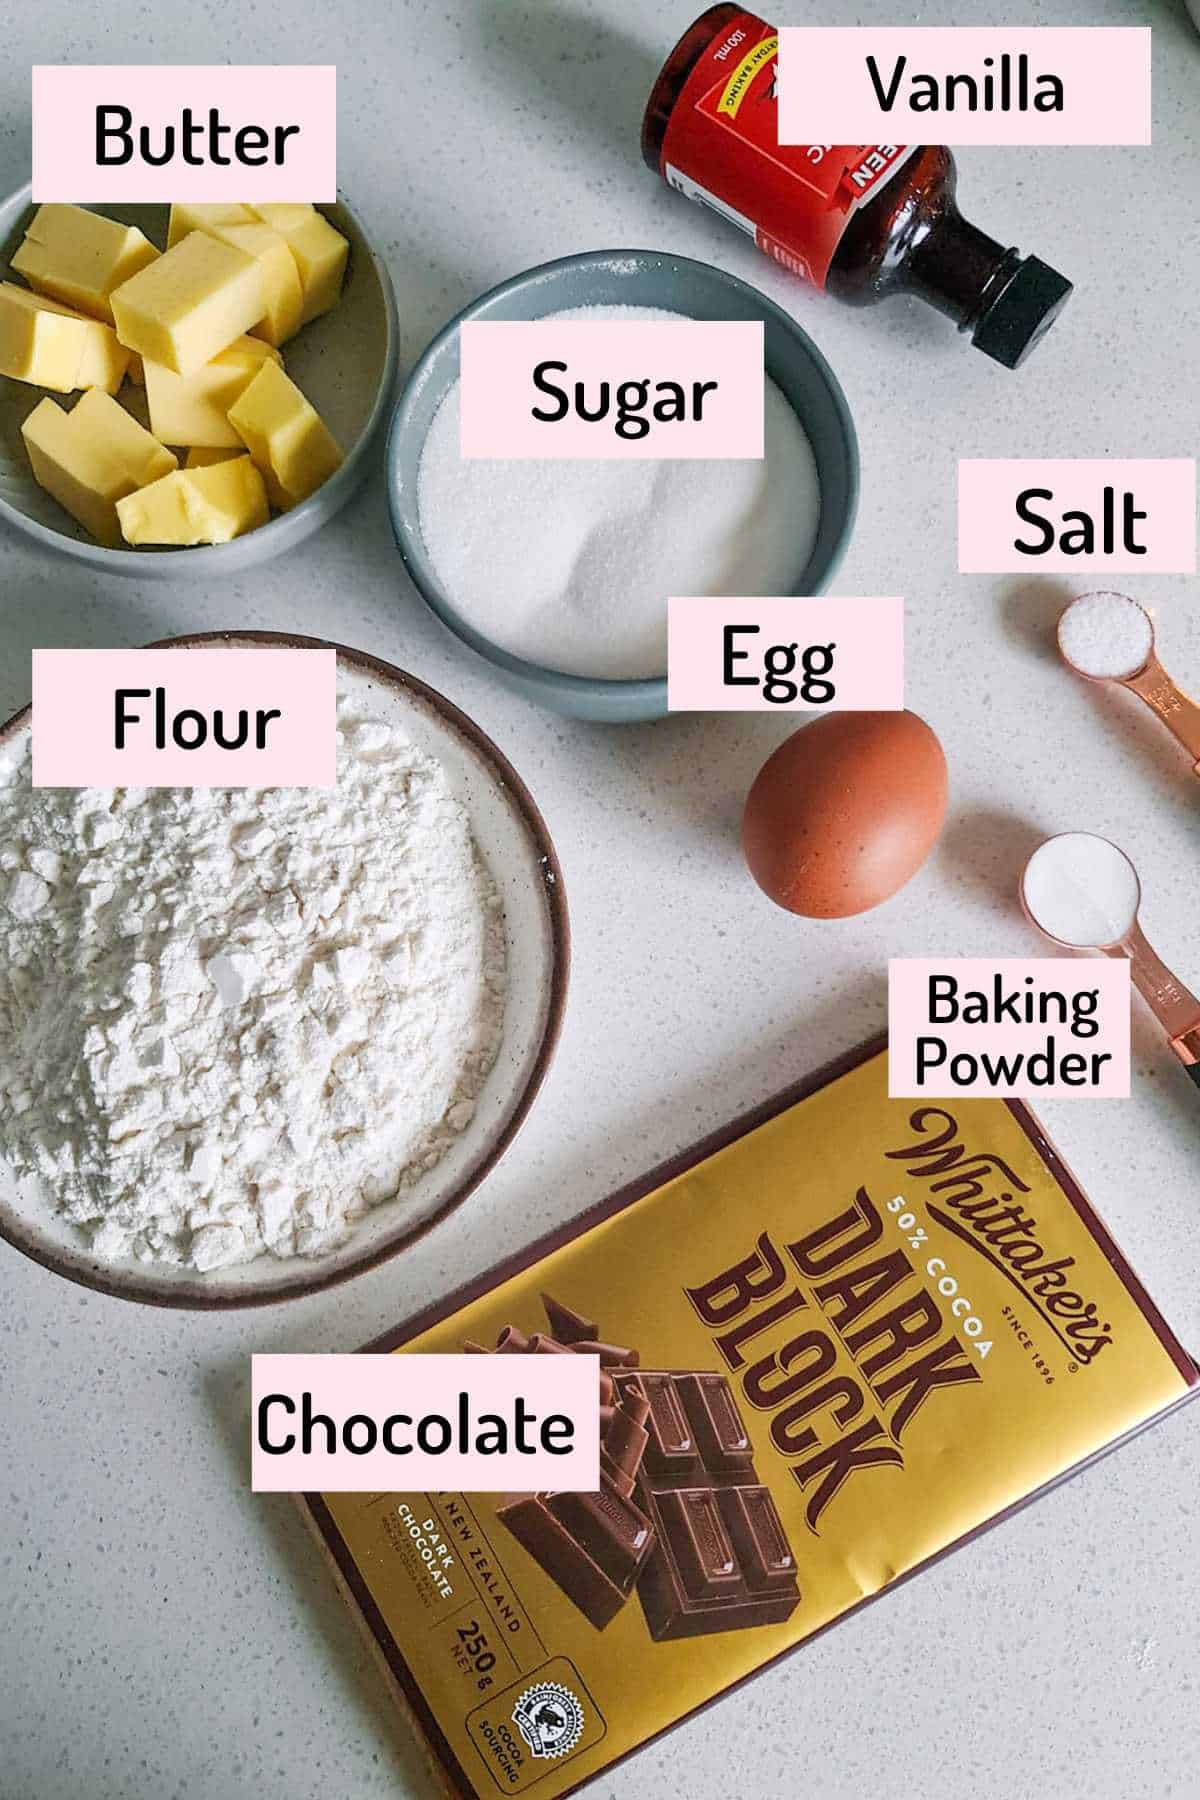 ingredients needed to make the chocolate chip cookies without brown sugar